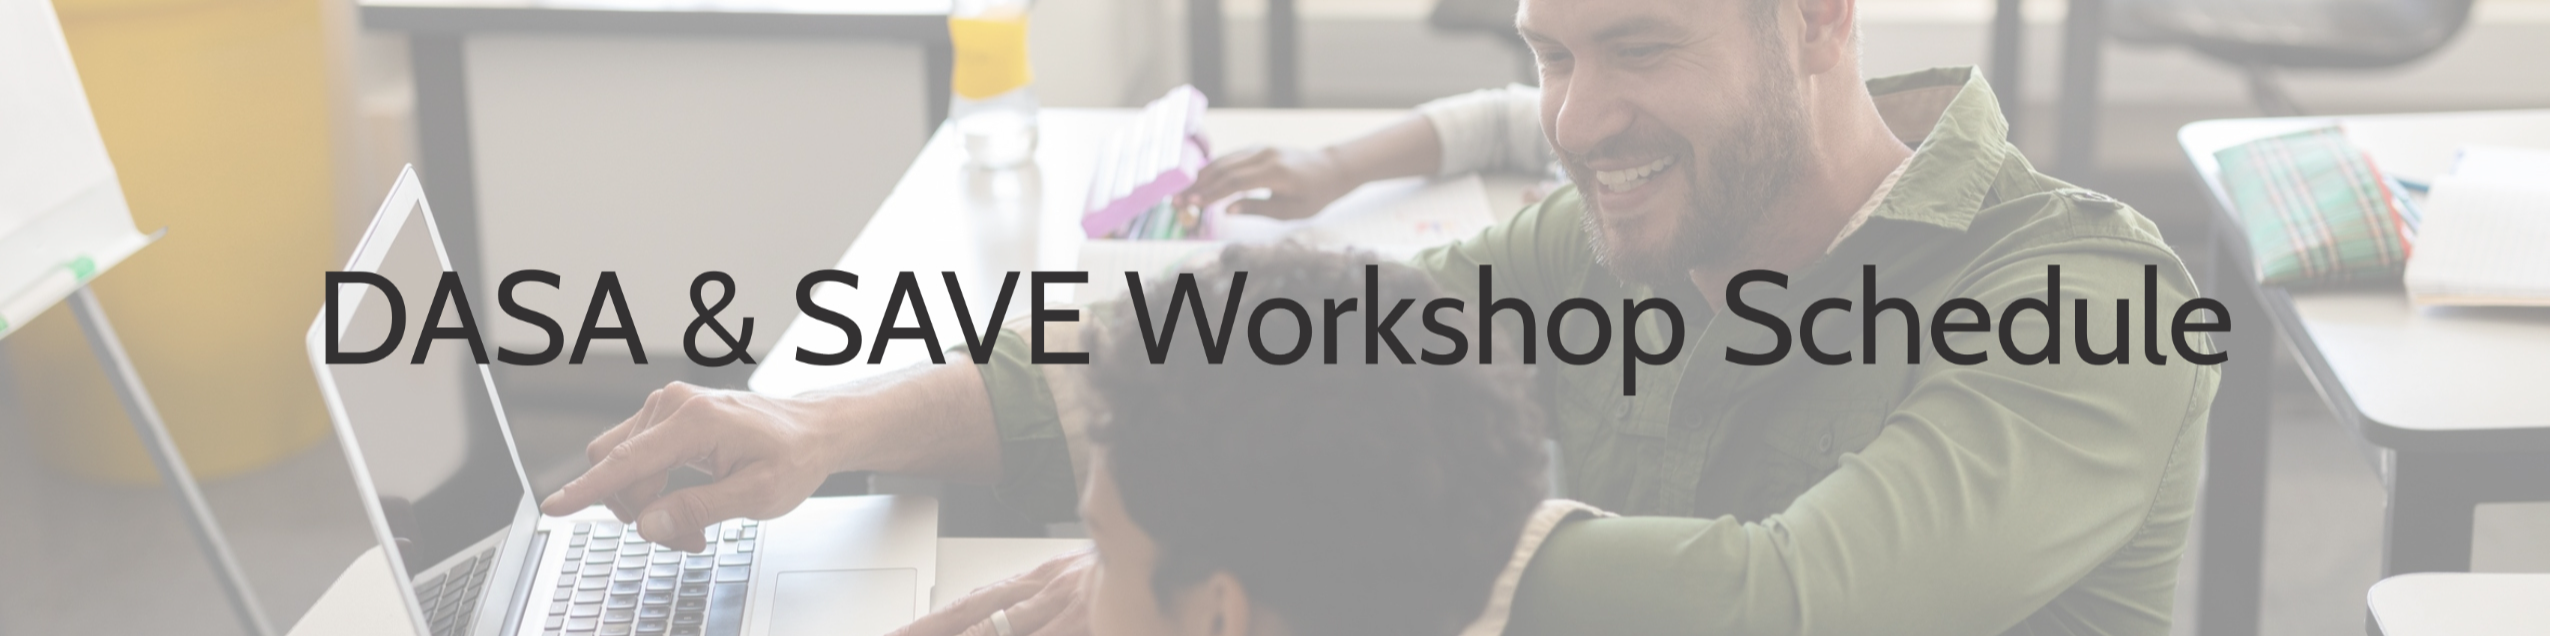 DASA and Save Workshop Schedule Programs and Professional Development